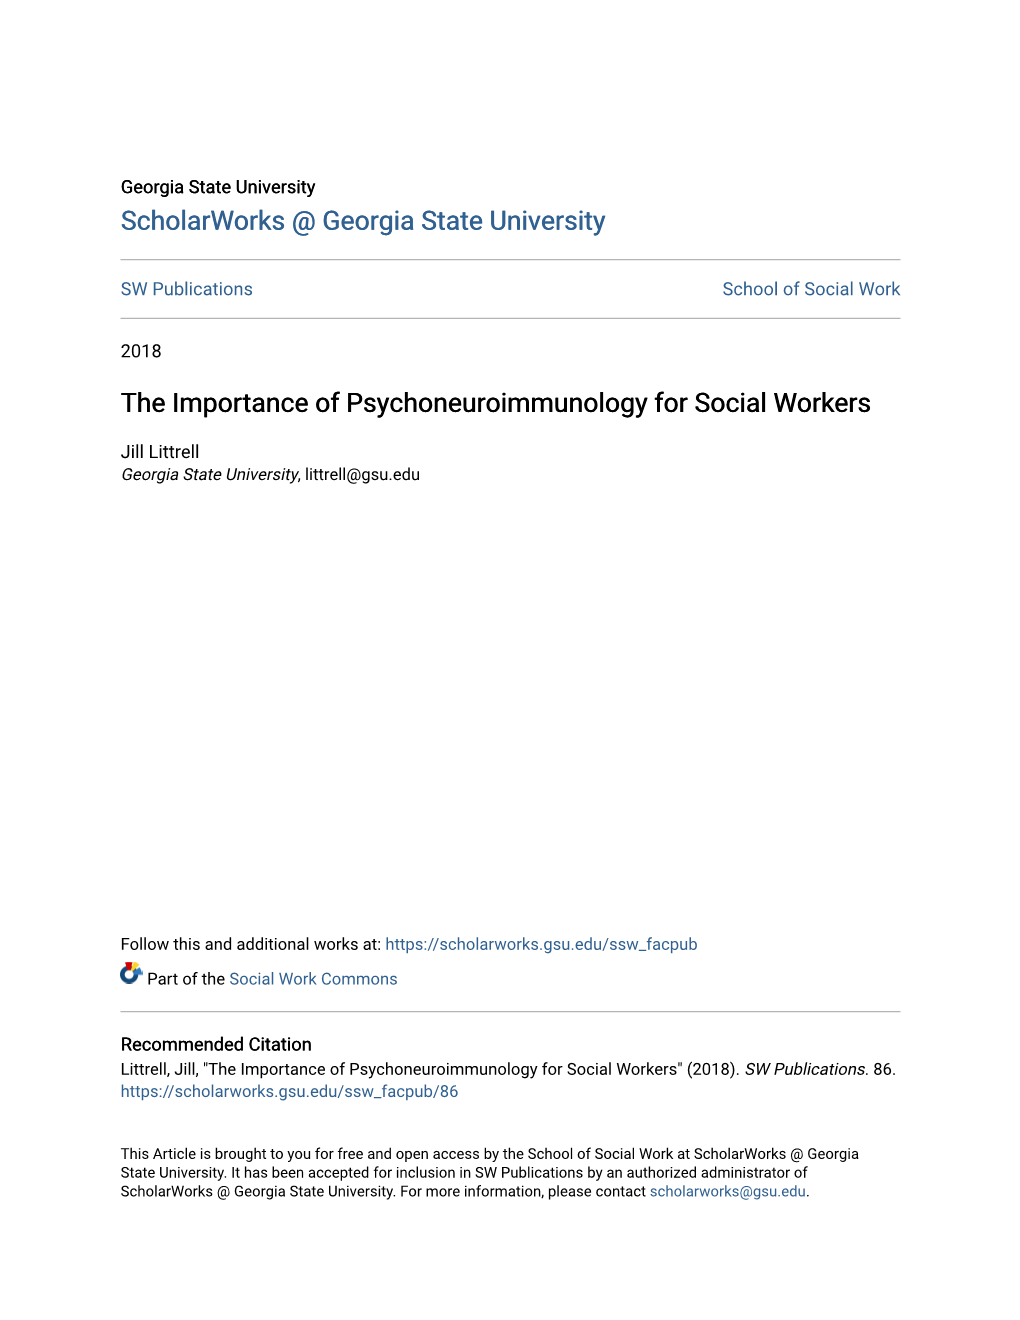 The Importance of Psychoneuroimmunology for Social Workers